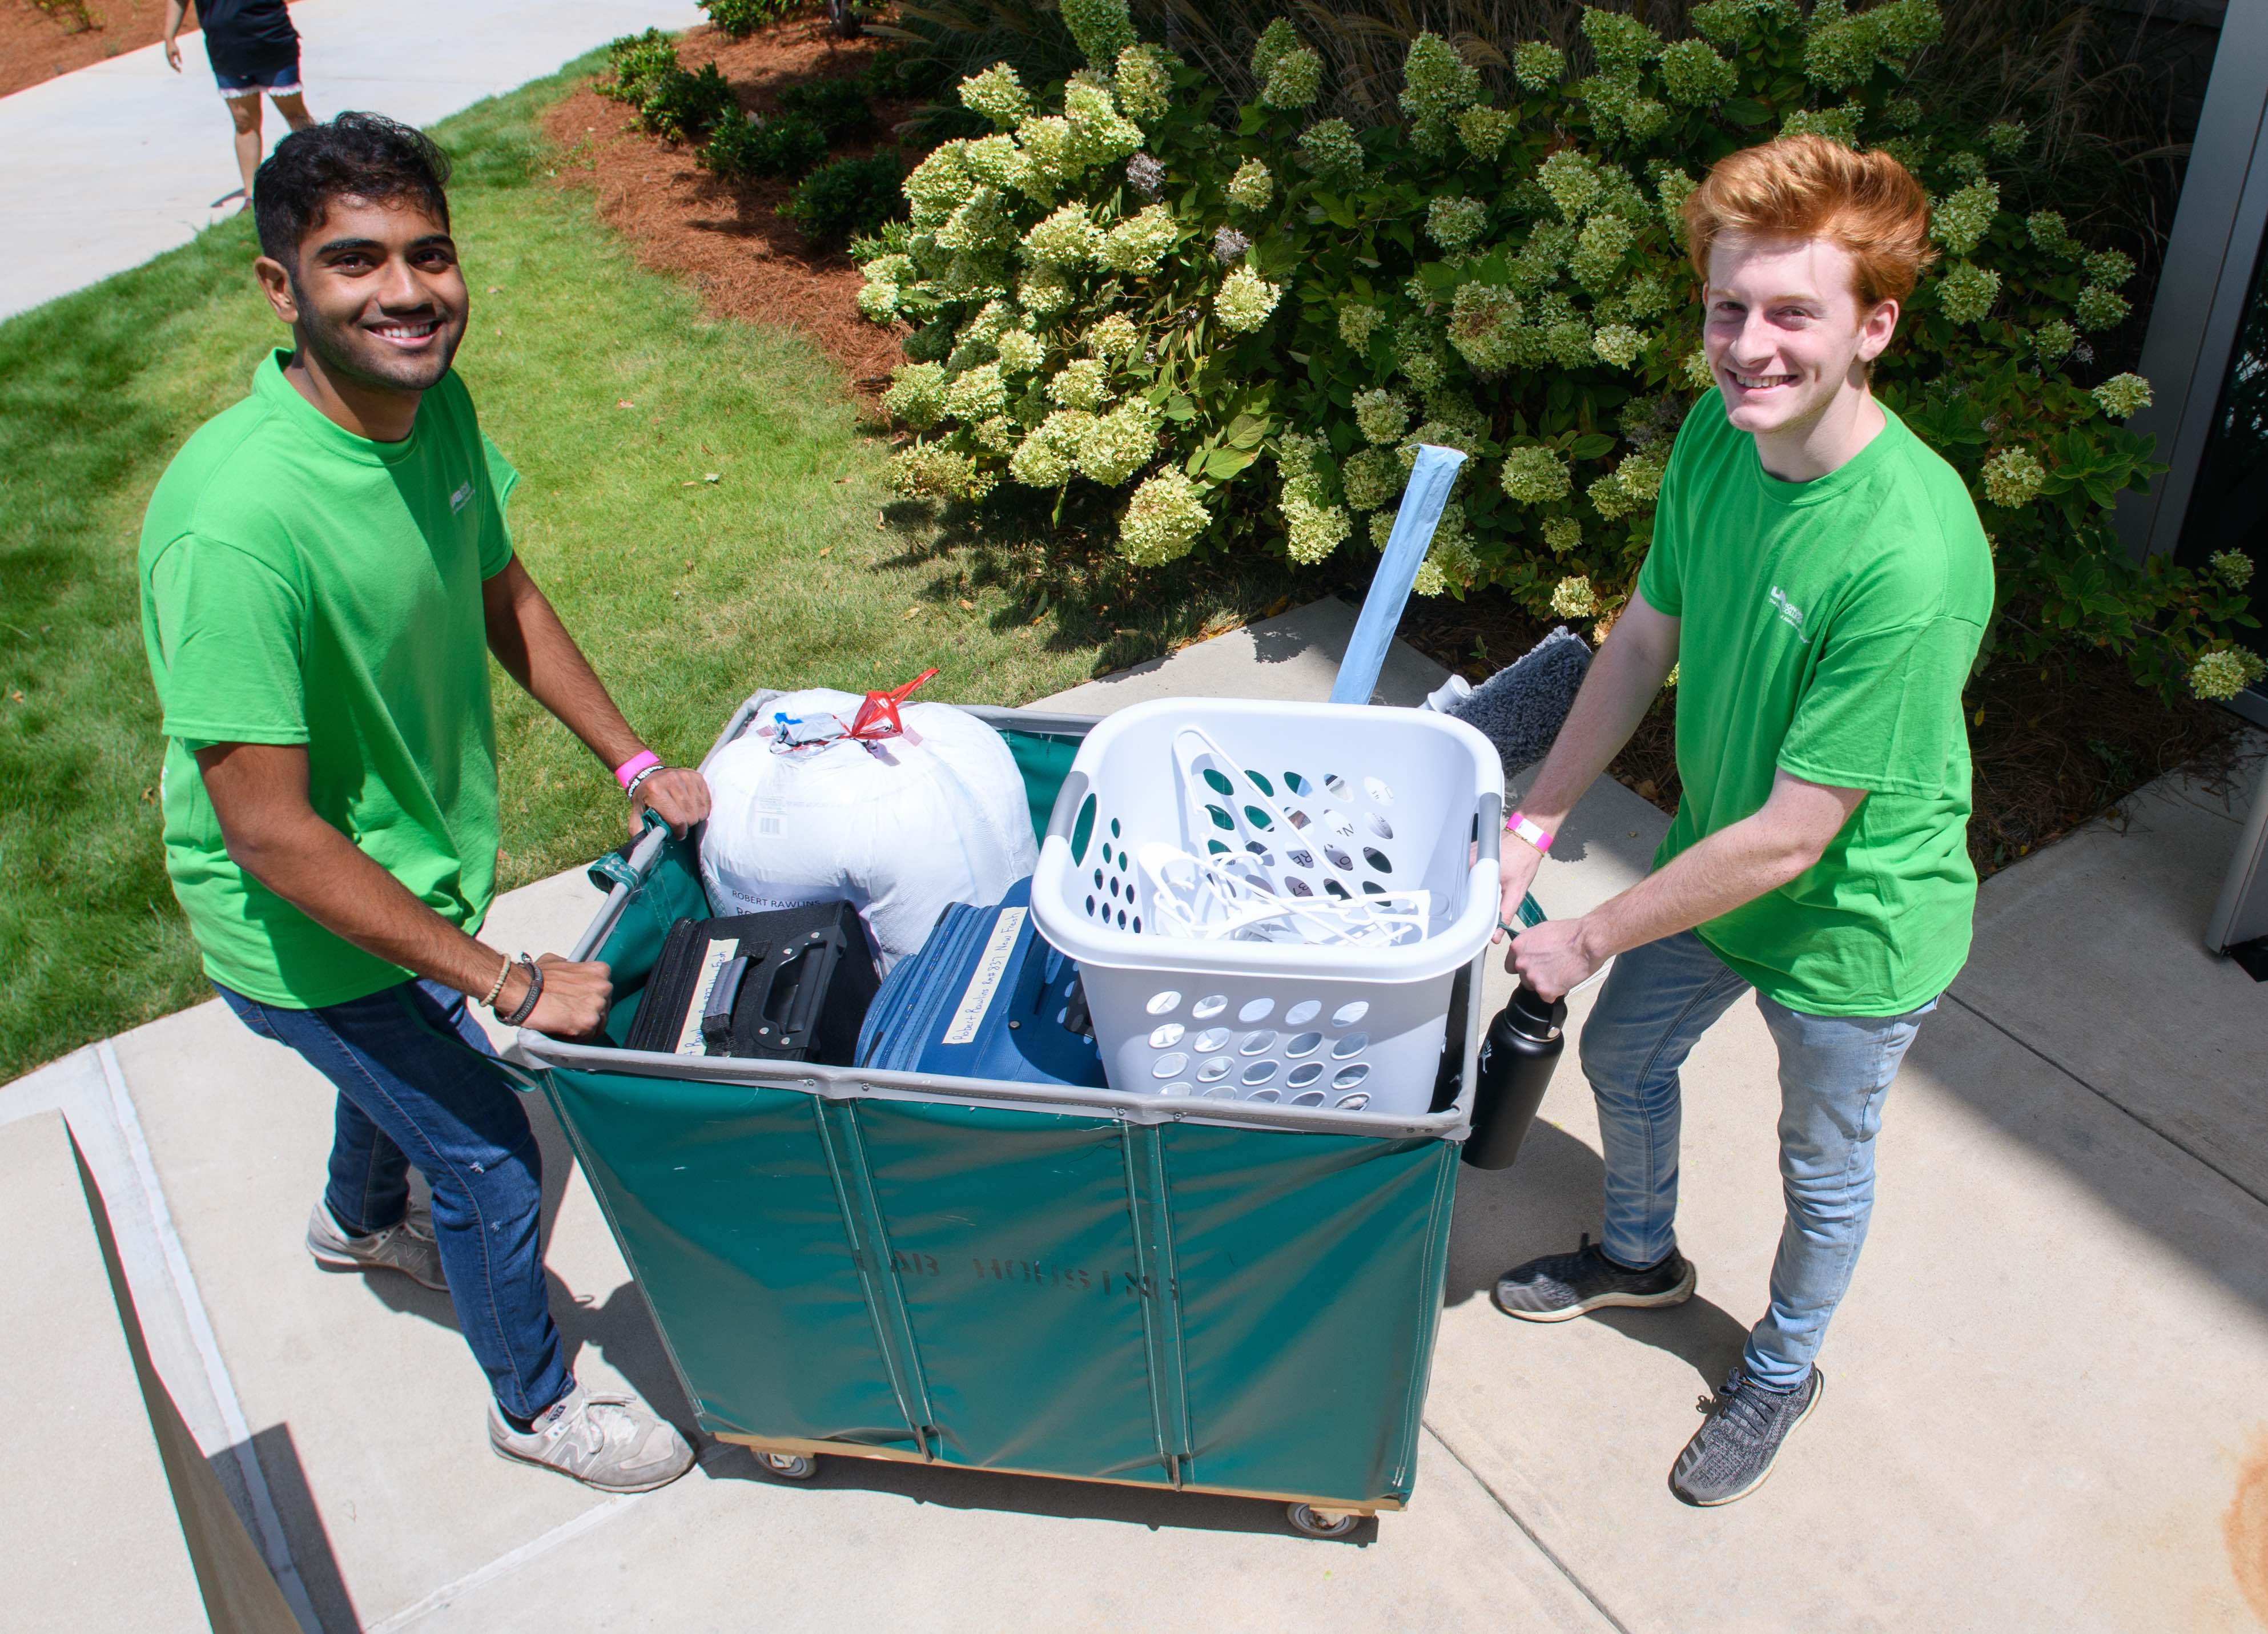 2019 UAB Honors College Move-In Day. Two smiling student volunteers are pushing a moving cart on a sidewalk on August 21, 2019.